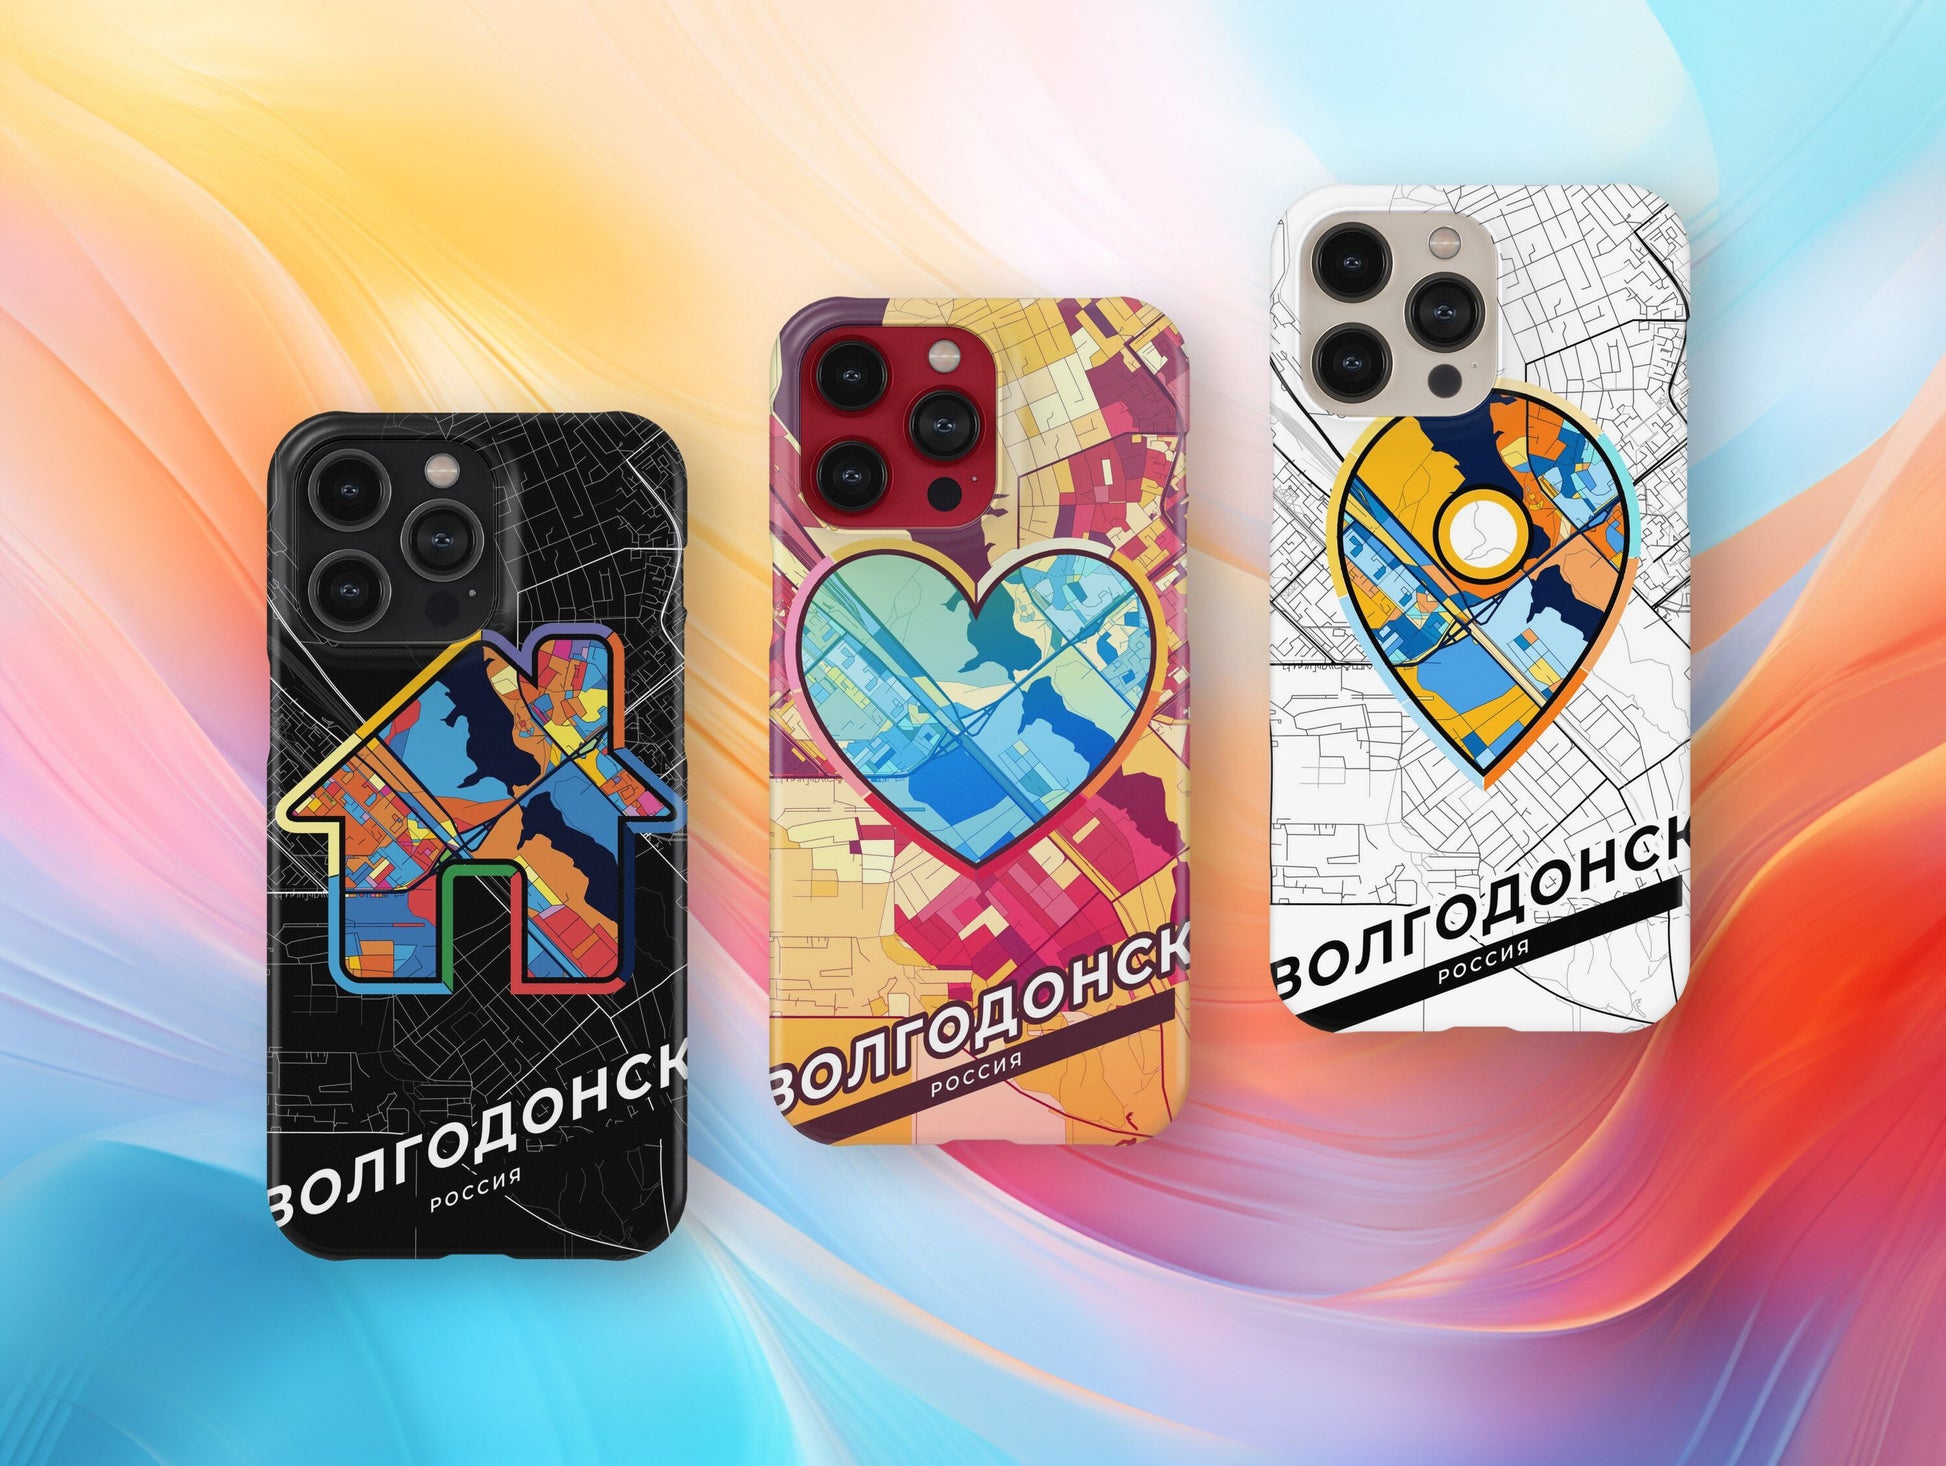 Volgodonsk Russia slim phone case with colorful icon